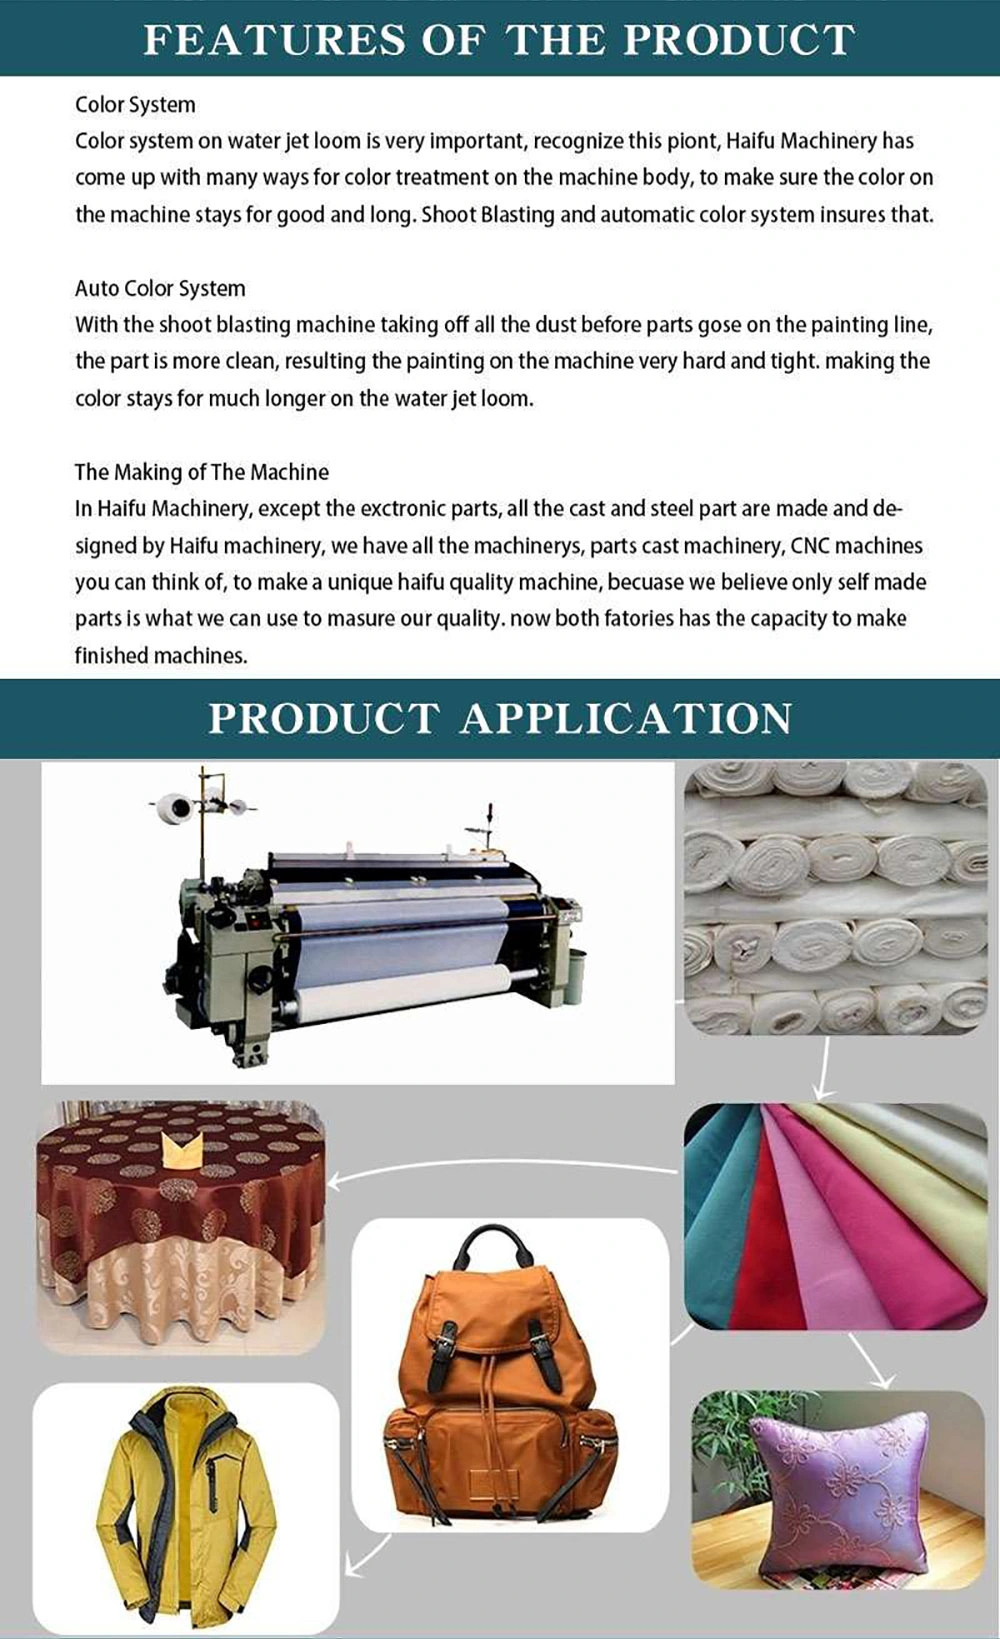 Mechanical High-Quality Fabrics Are Produced at Lower Prices, Textile Looms, Water Jet Looms